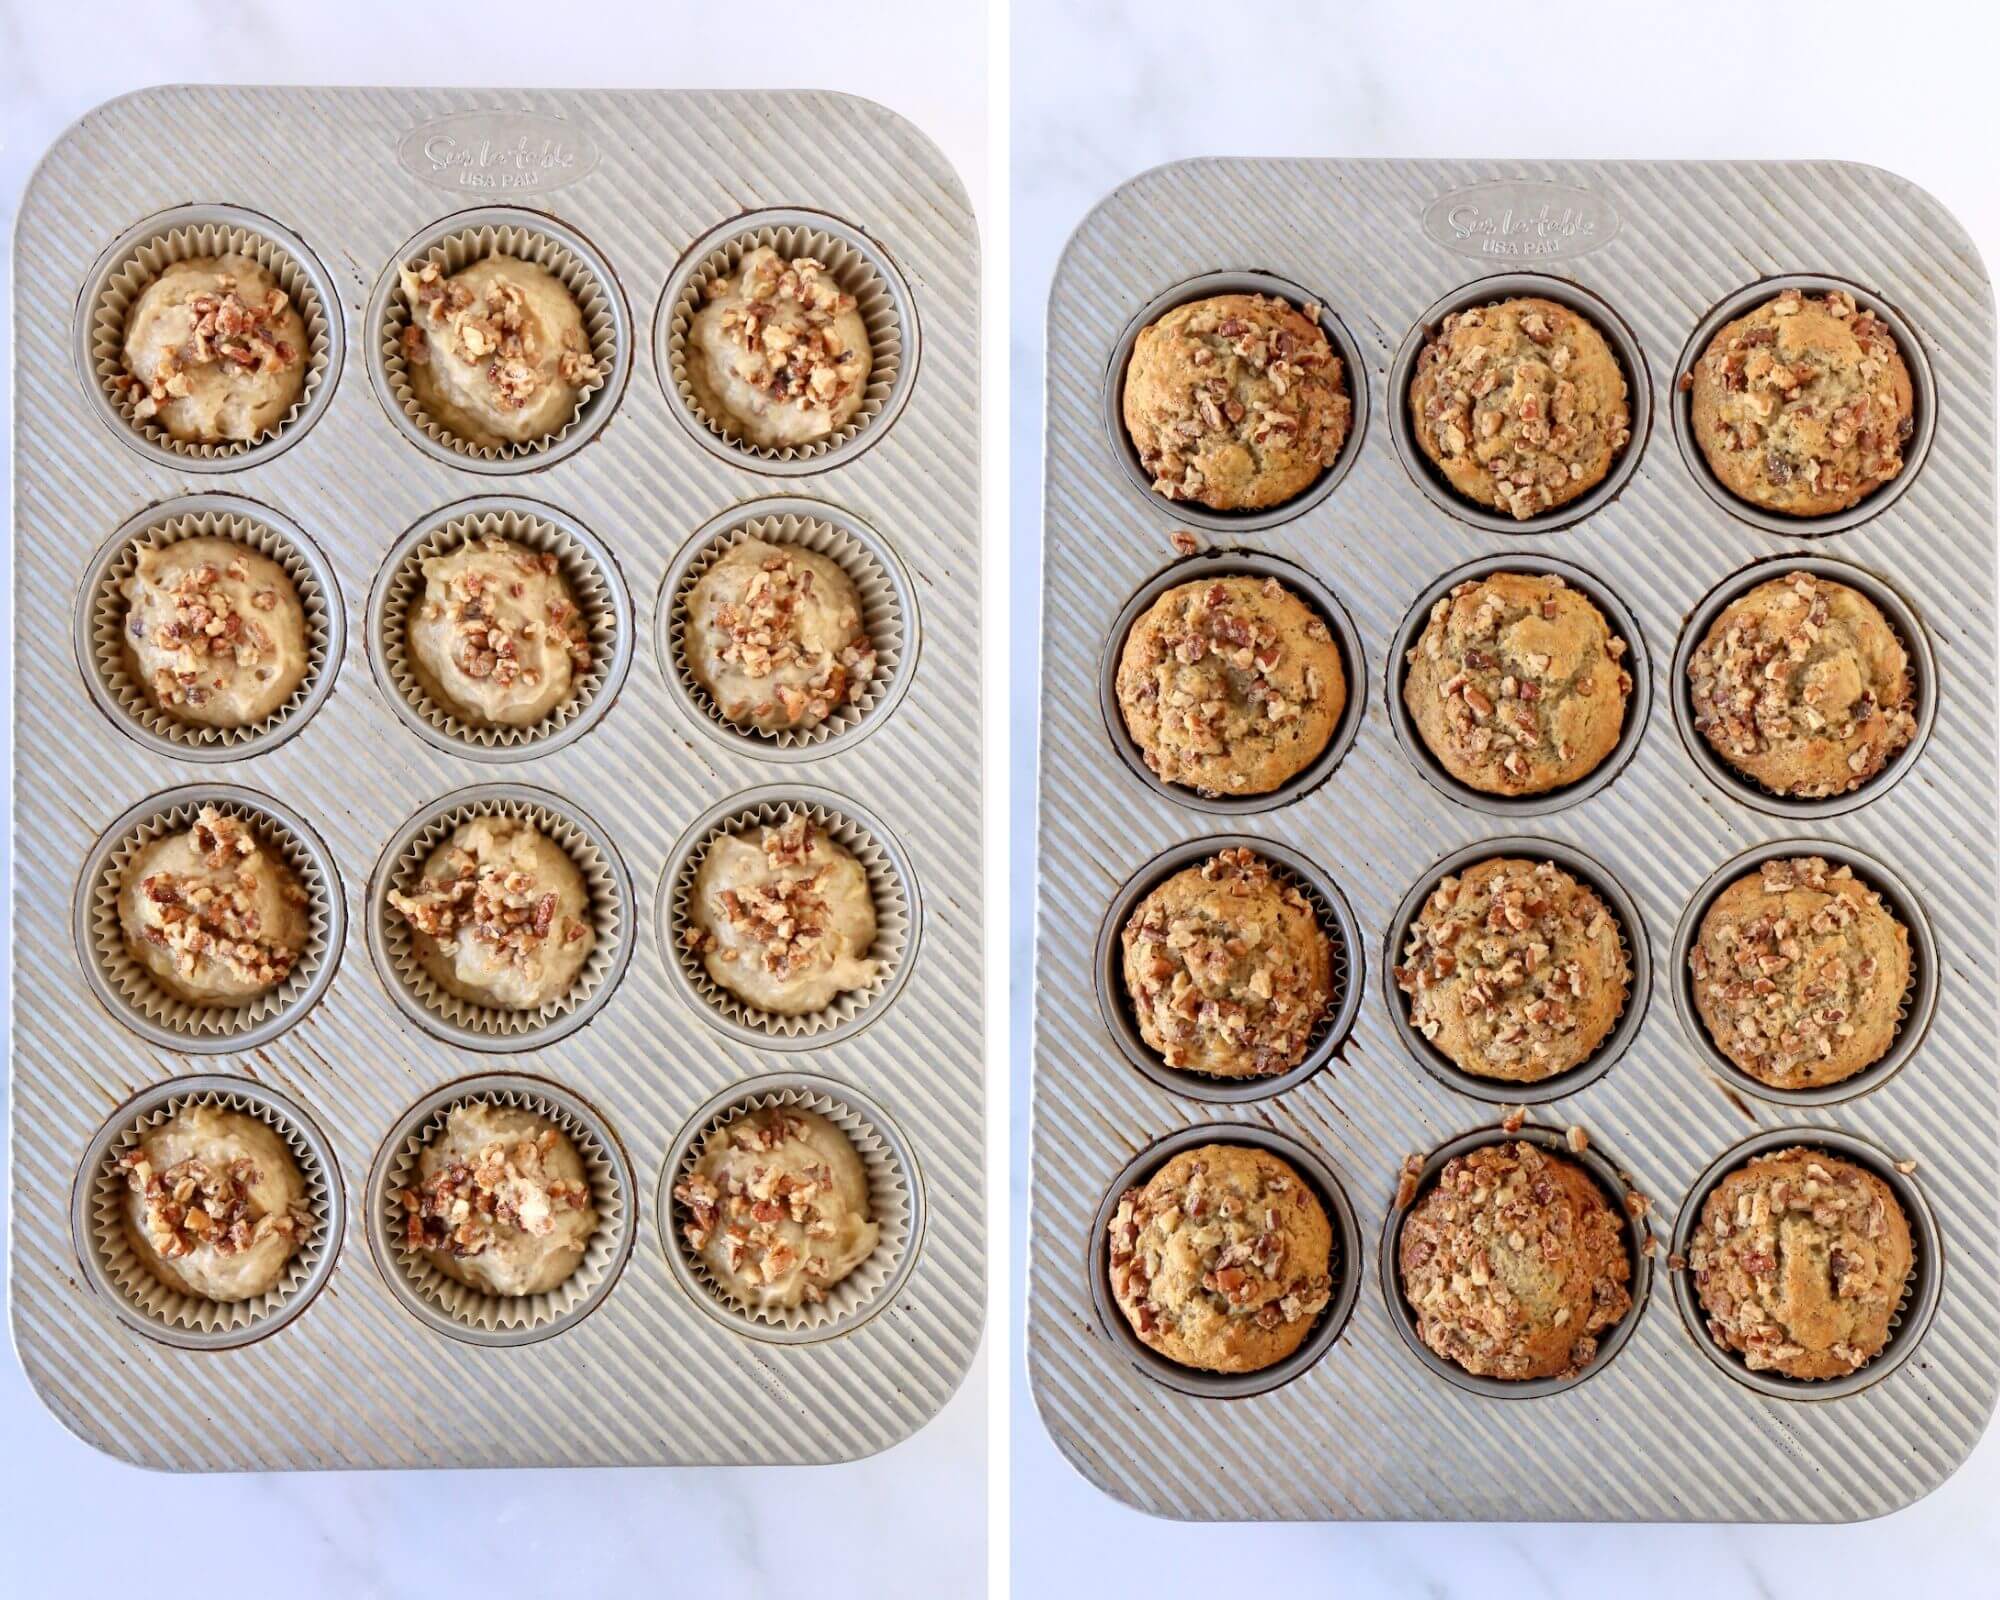 A muffin pan with paper liners filled with muffin batter next to a muffin pan with baked muffins.